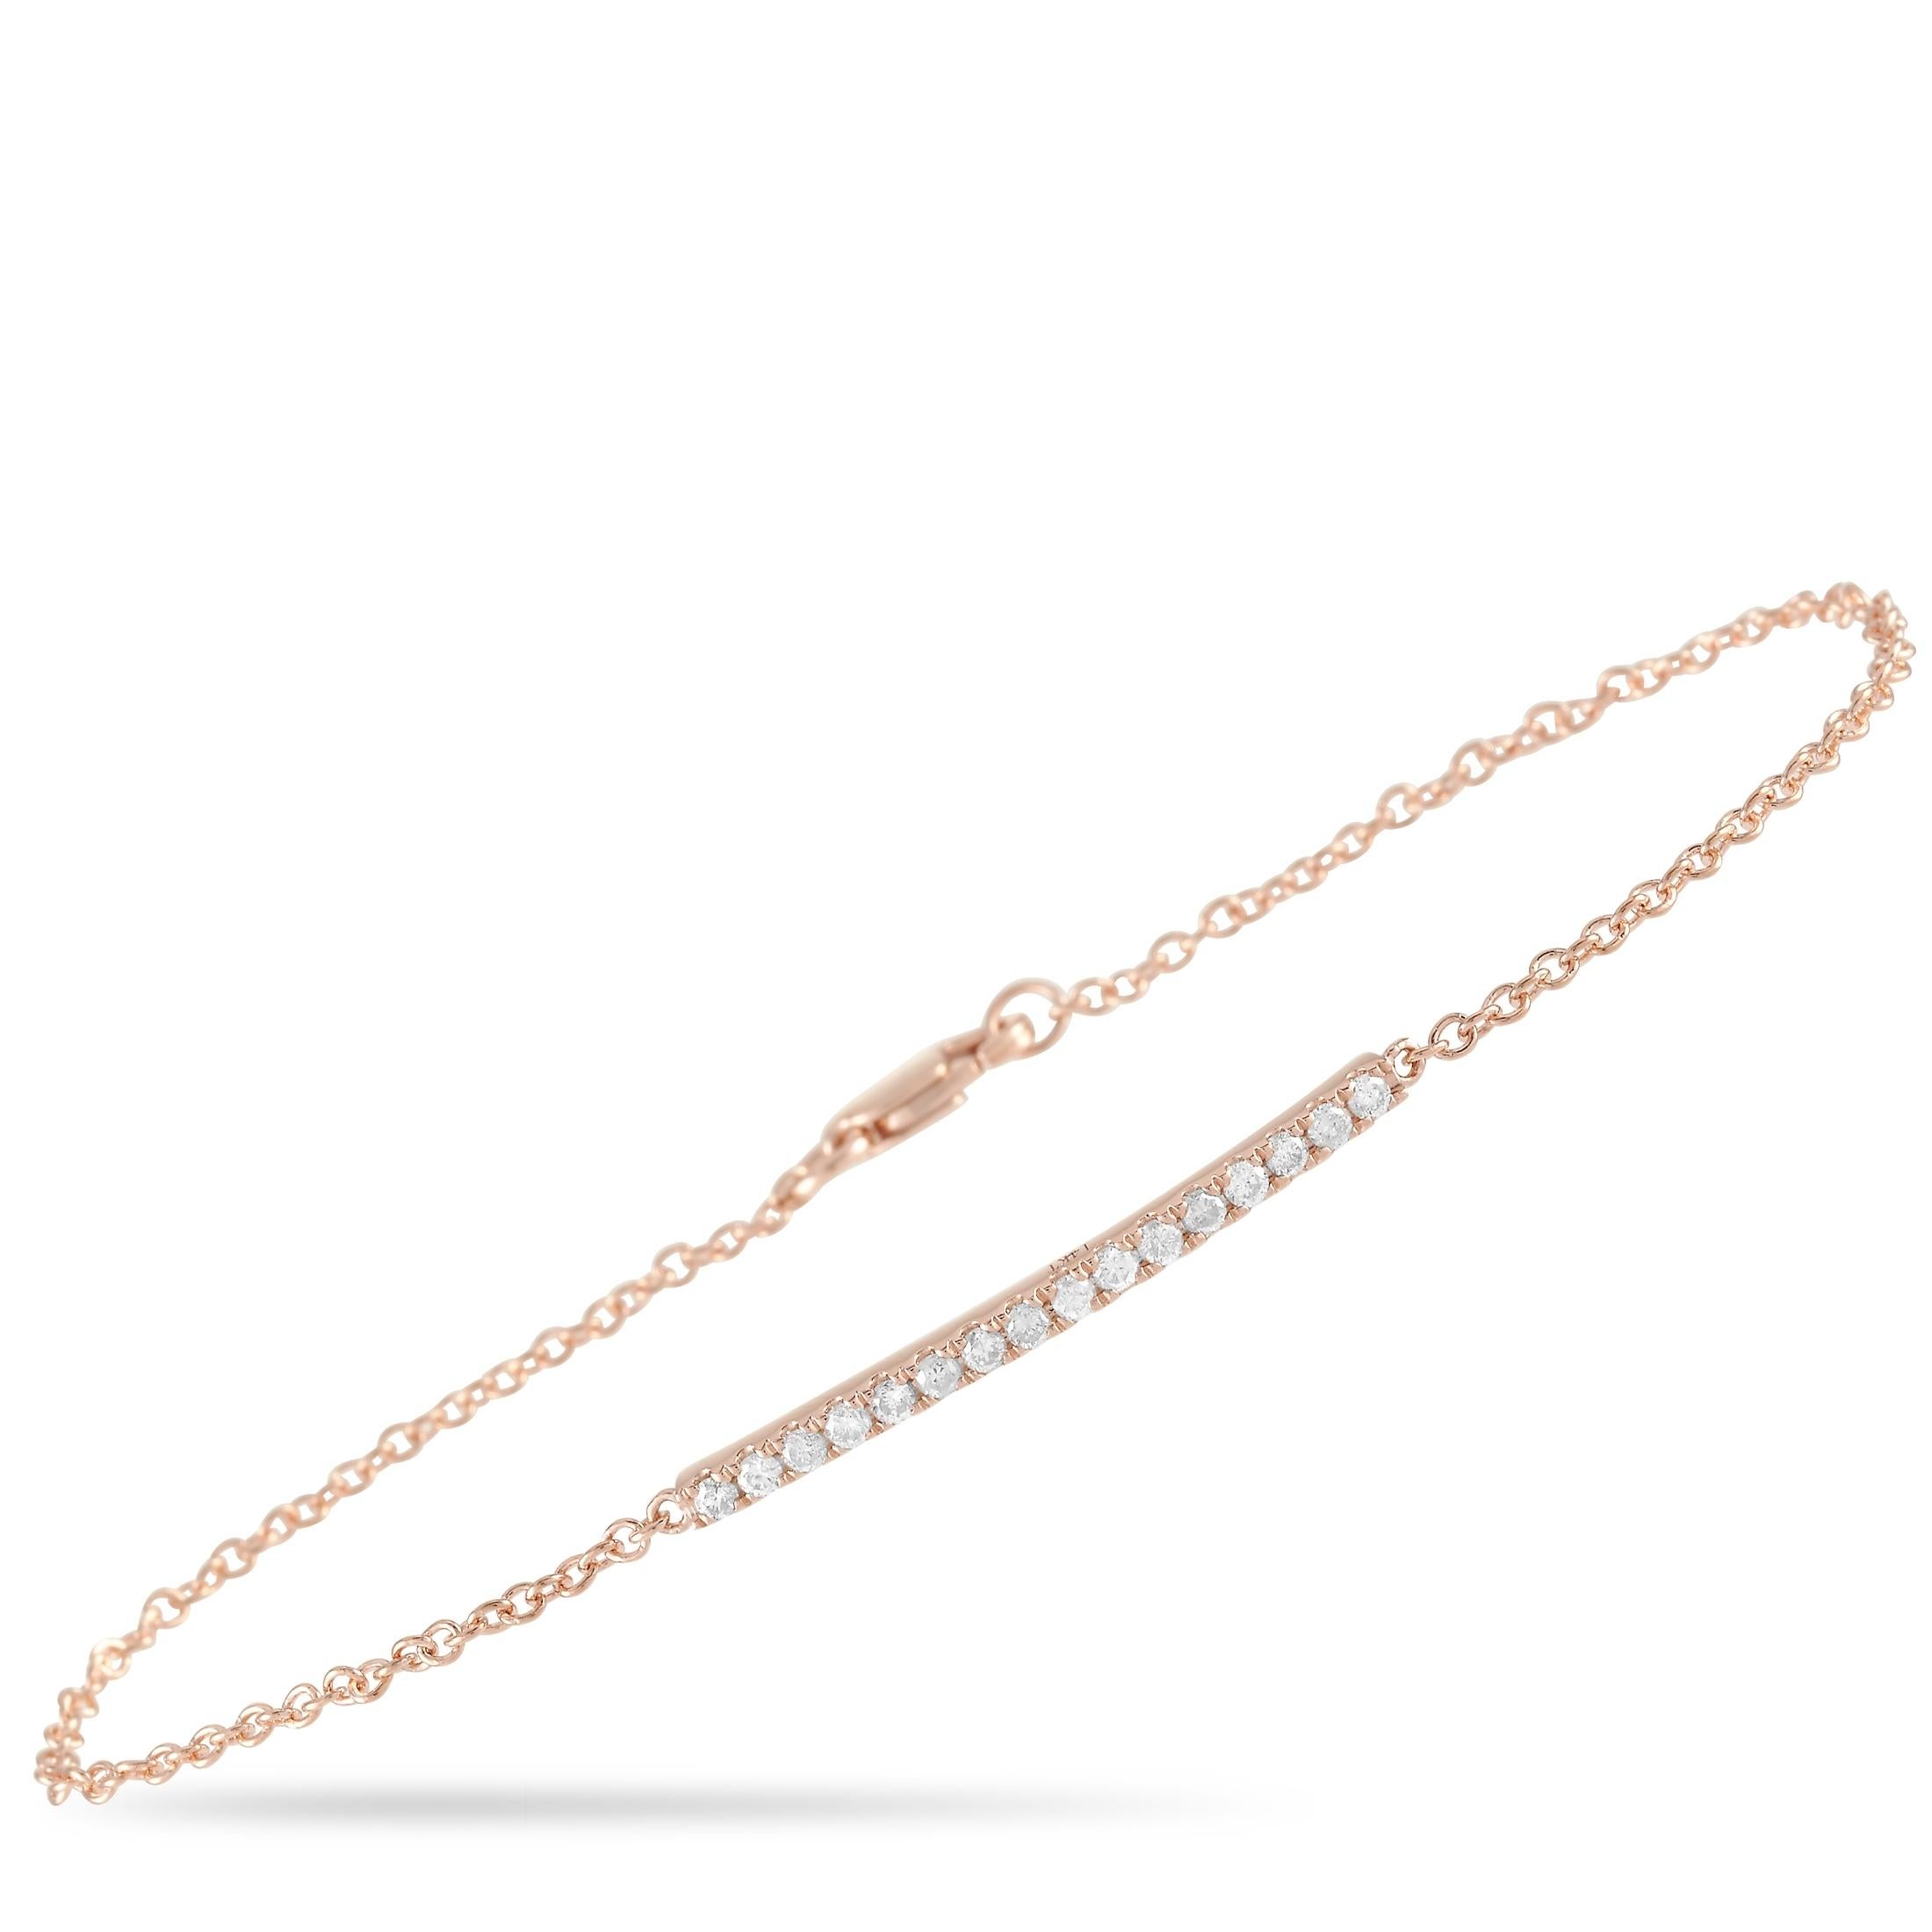 LB Exclusive 14K Rose Gold 0.25 Ct Diamond Bracelet In New Condition For Sale In Southampton, PA